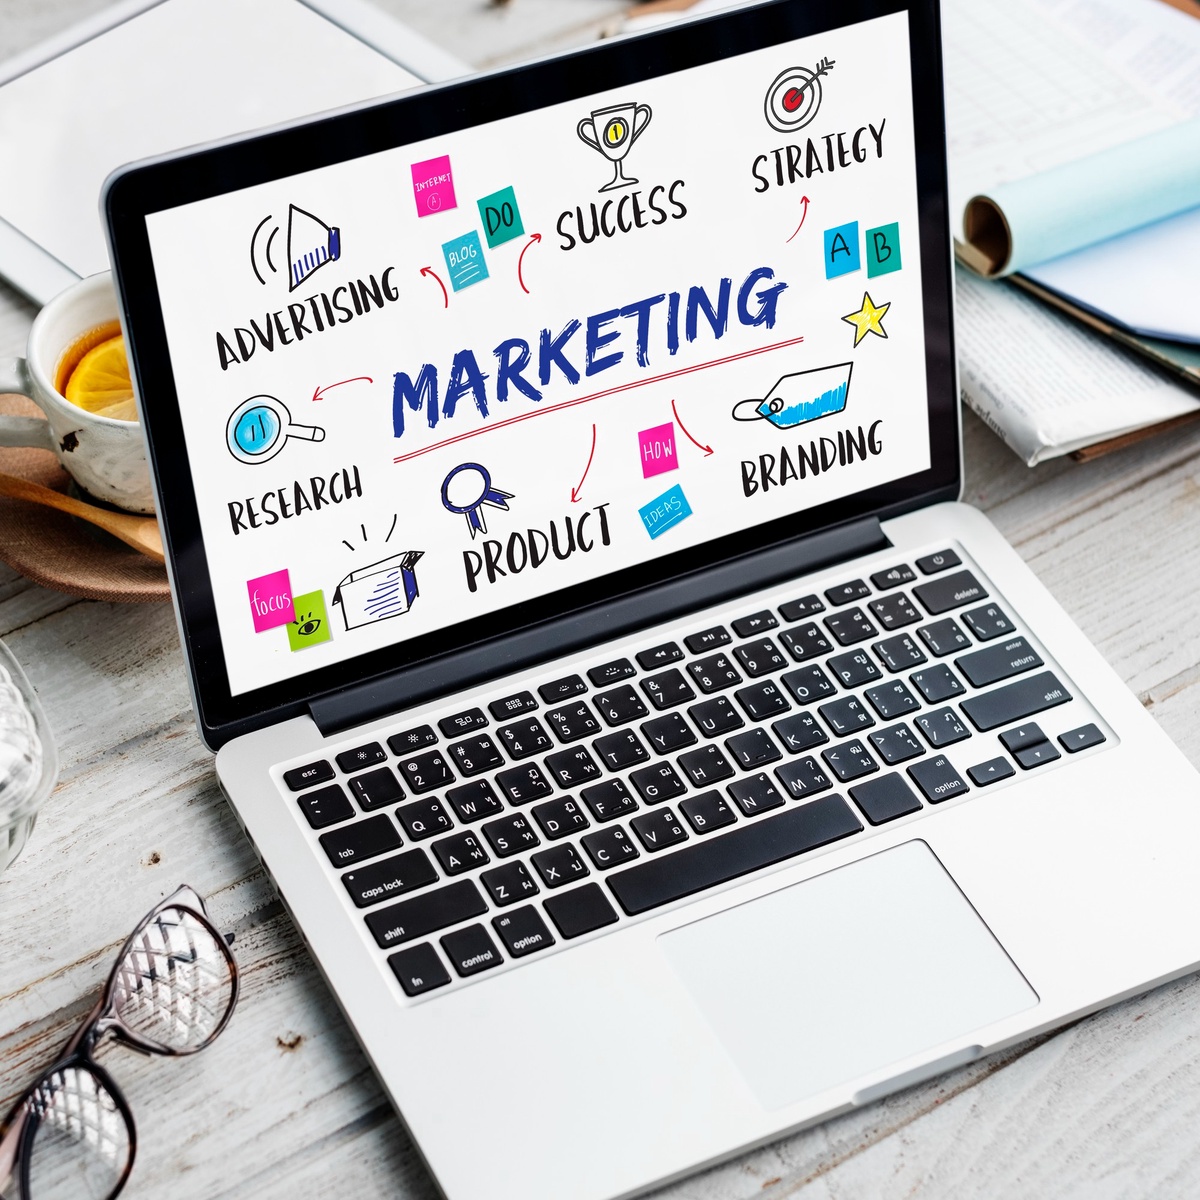 How Any Digital Marketing Services Can Help You Grow Your Business